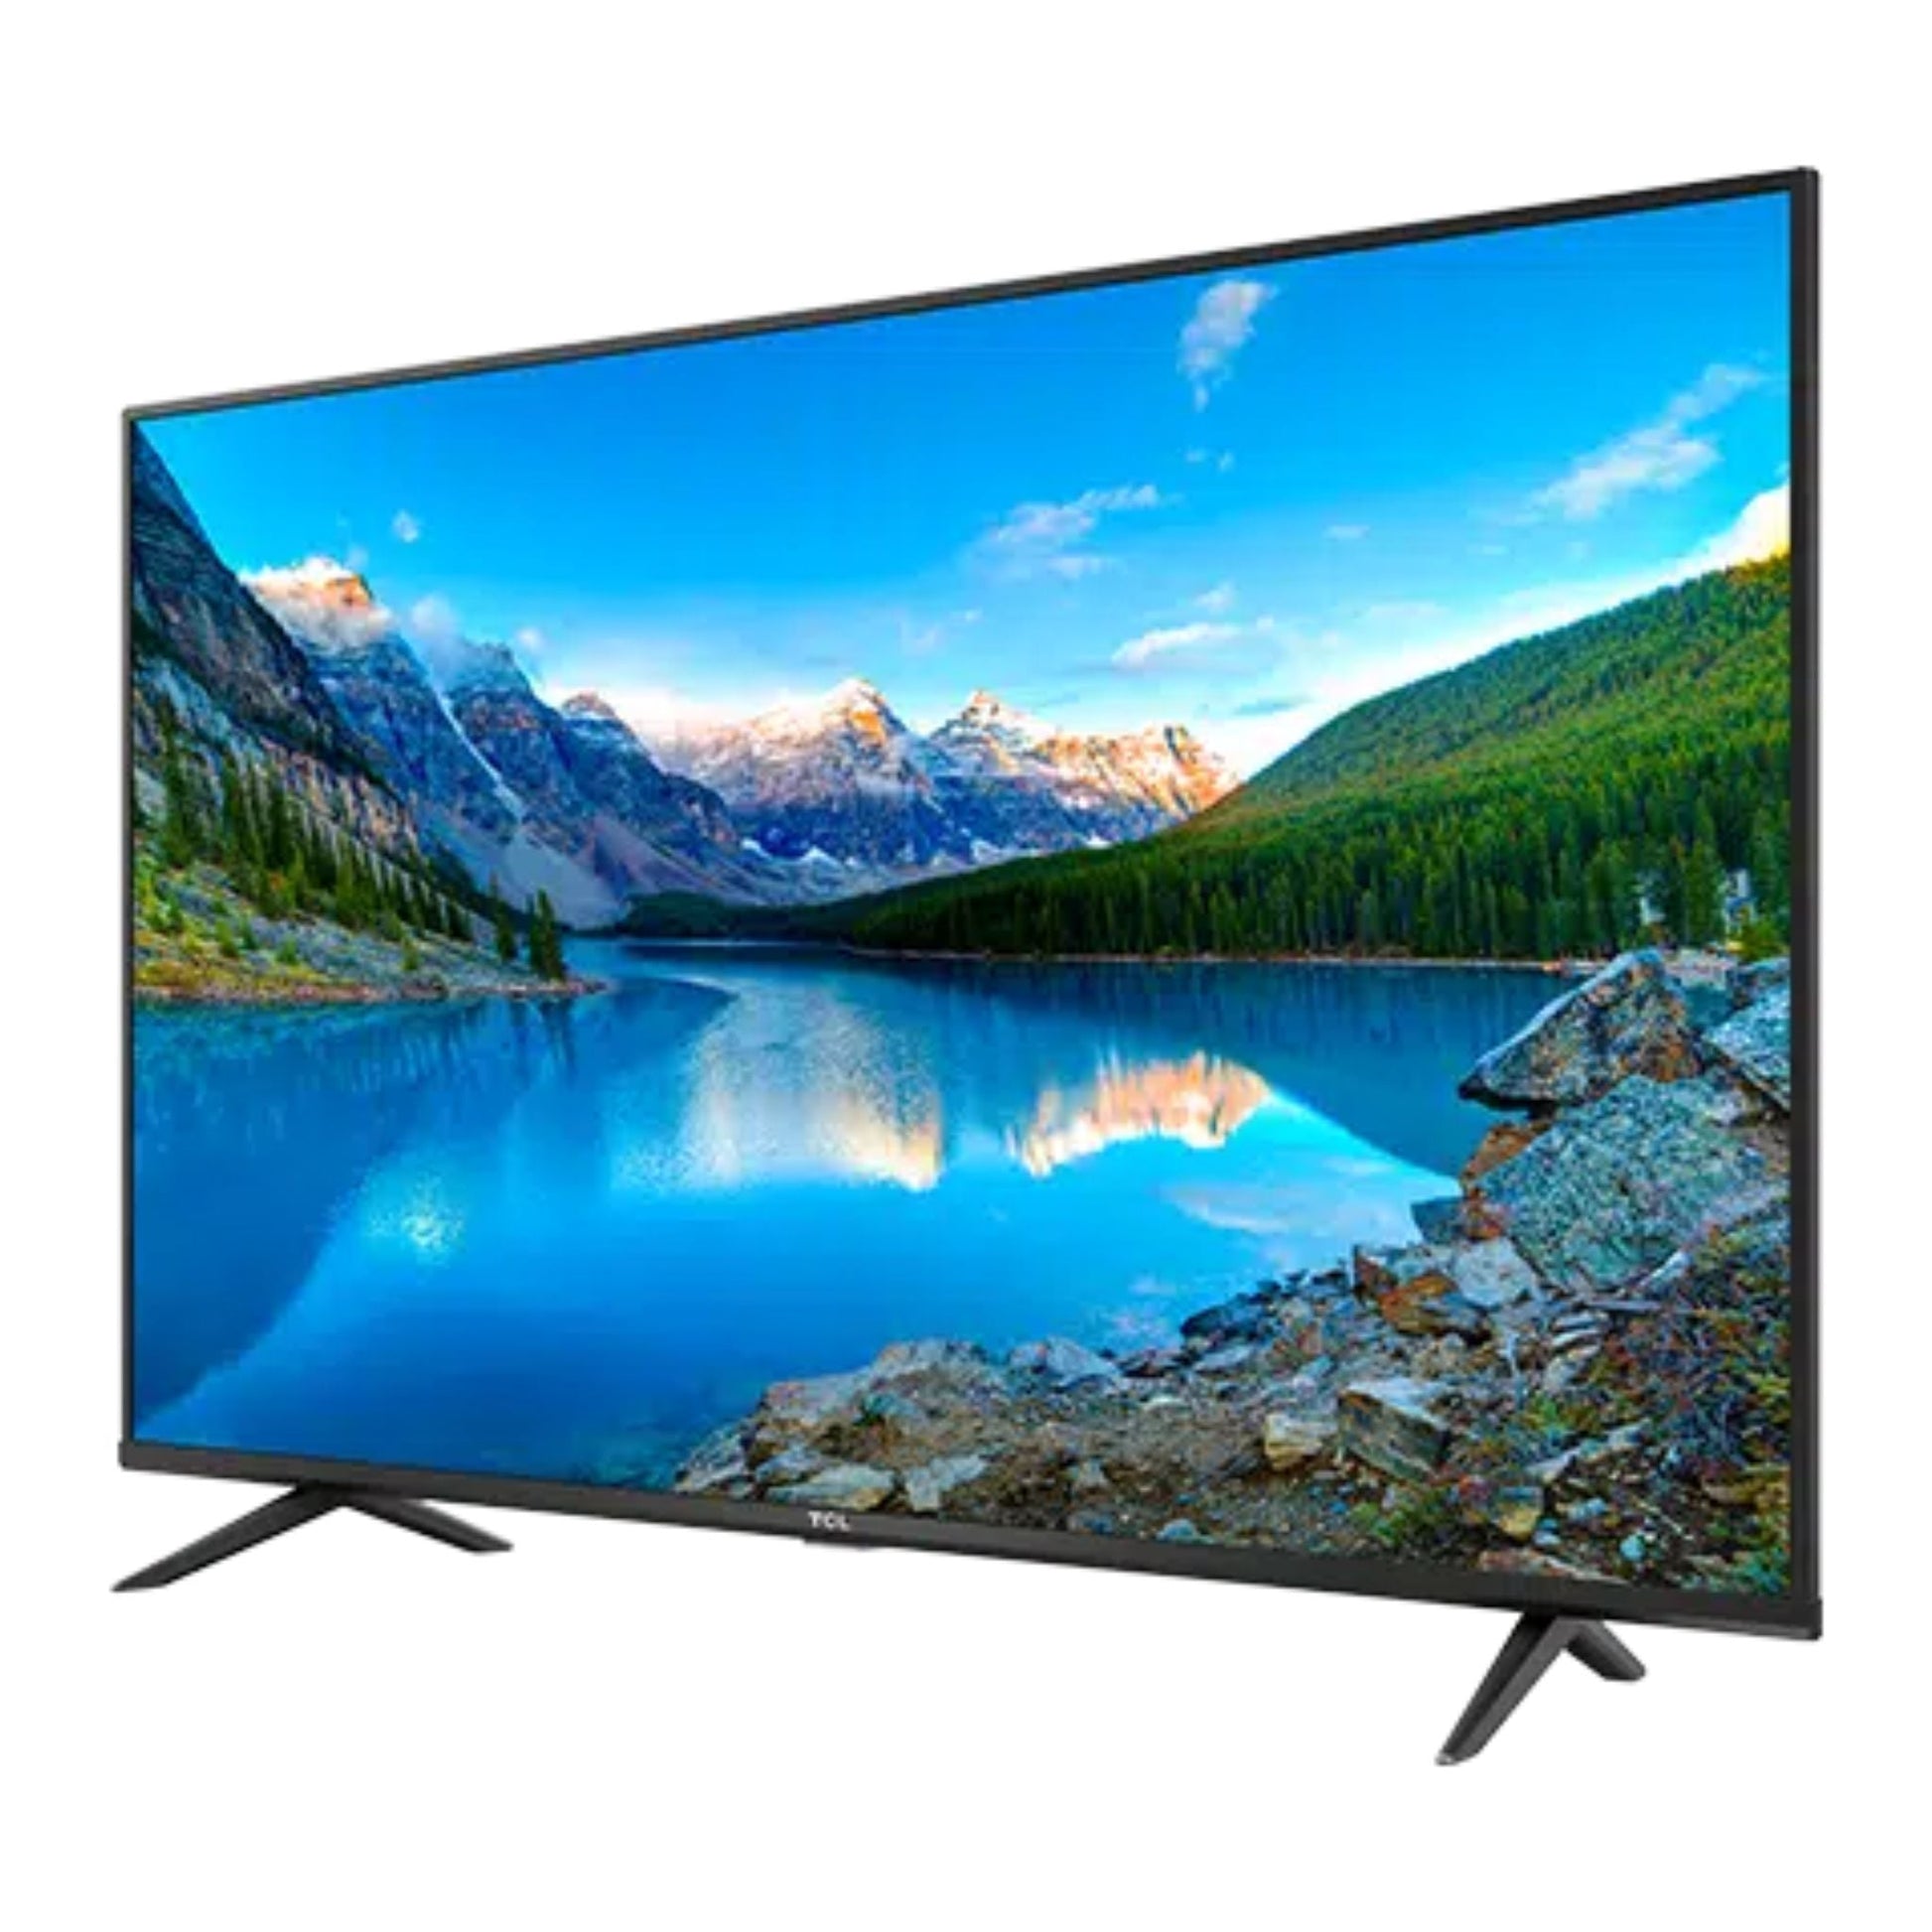 TCL 65 inch Smart TV, 65P4US